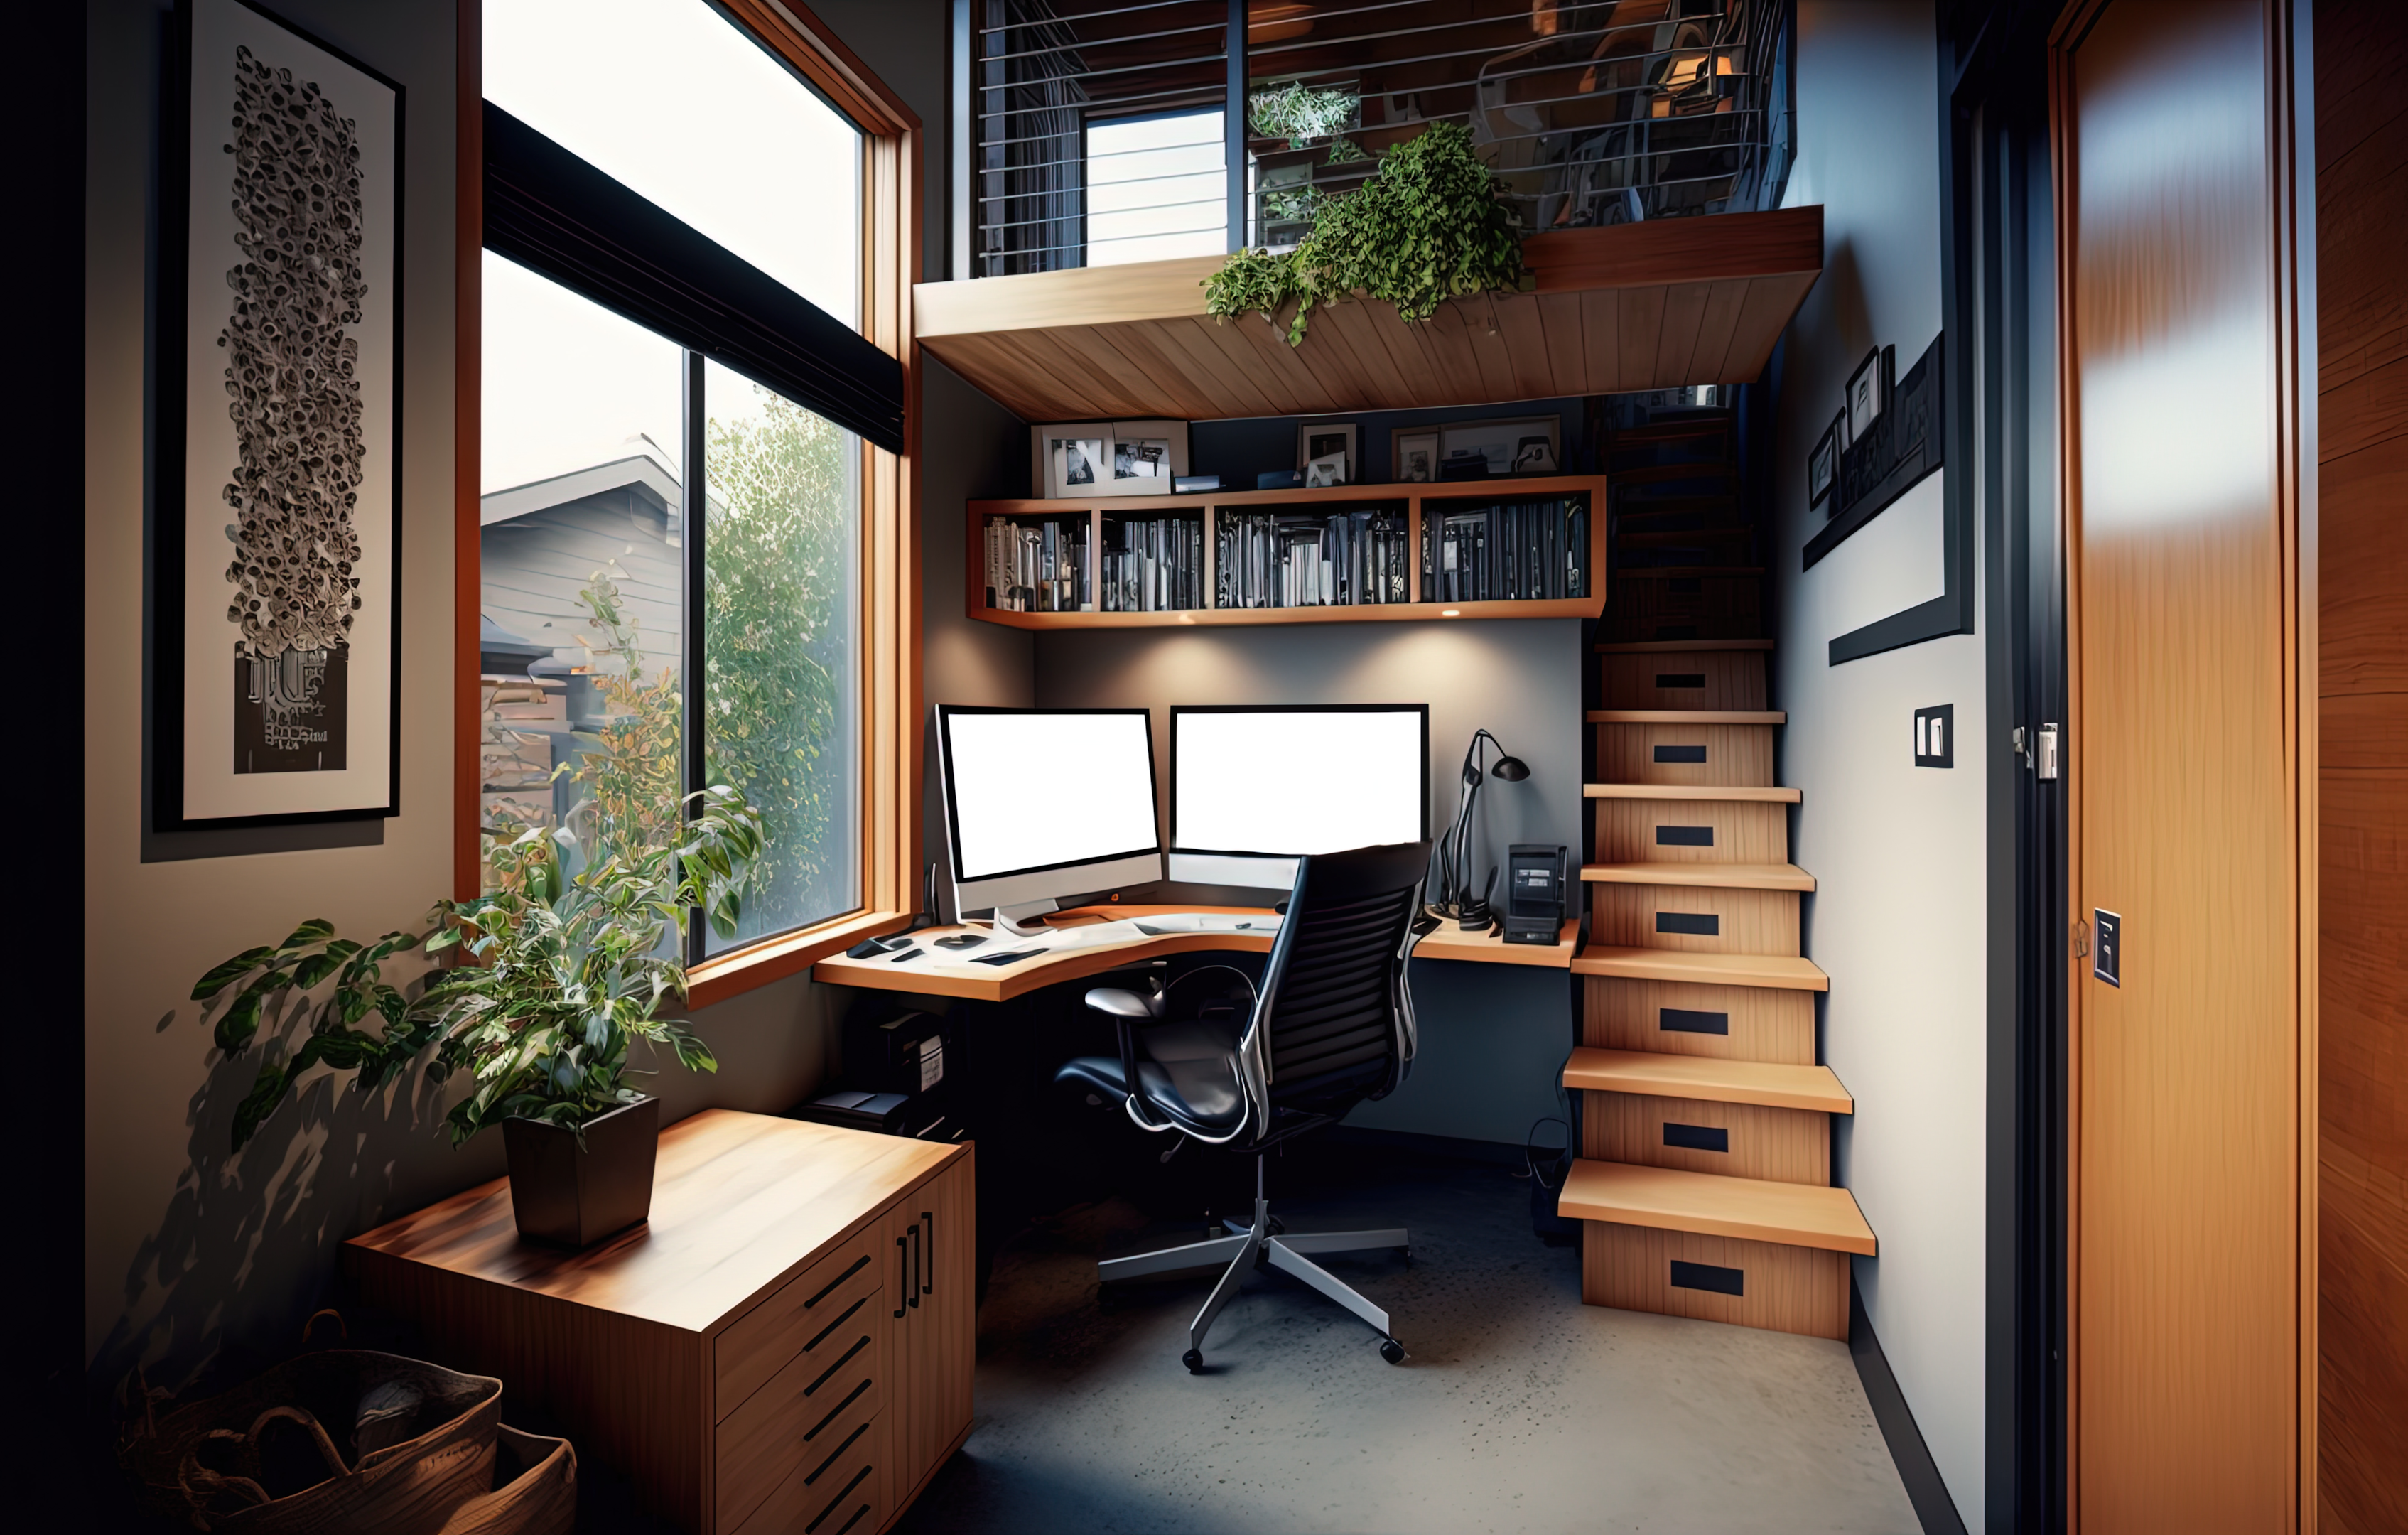 How to set up a home office with limited space